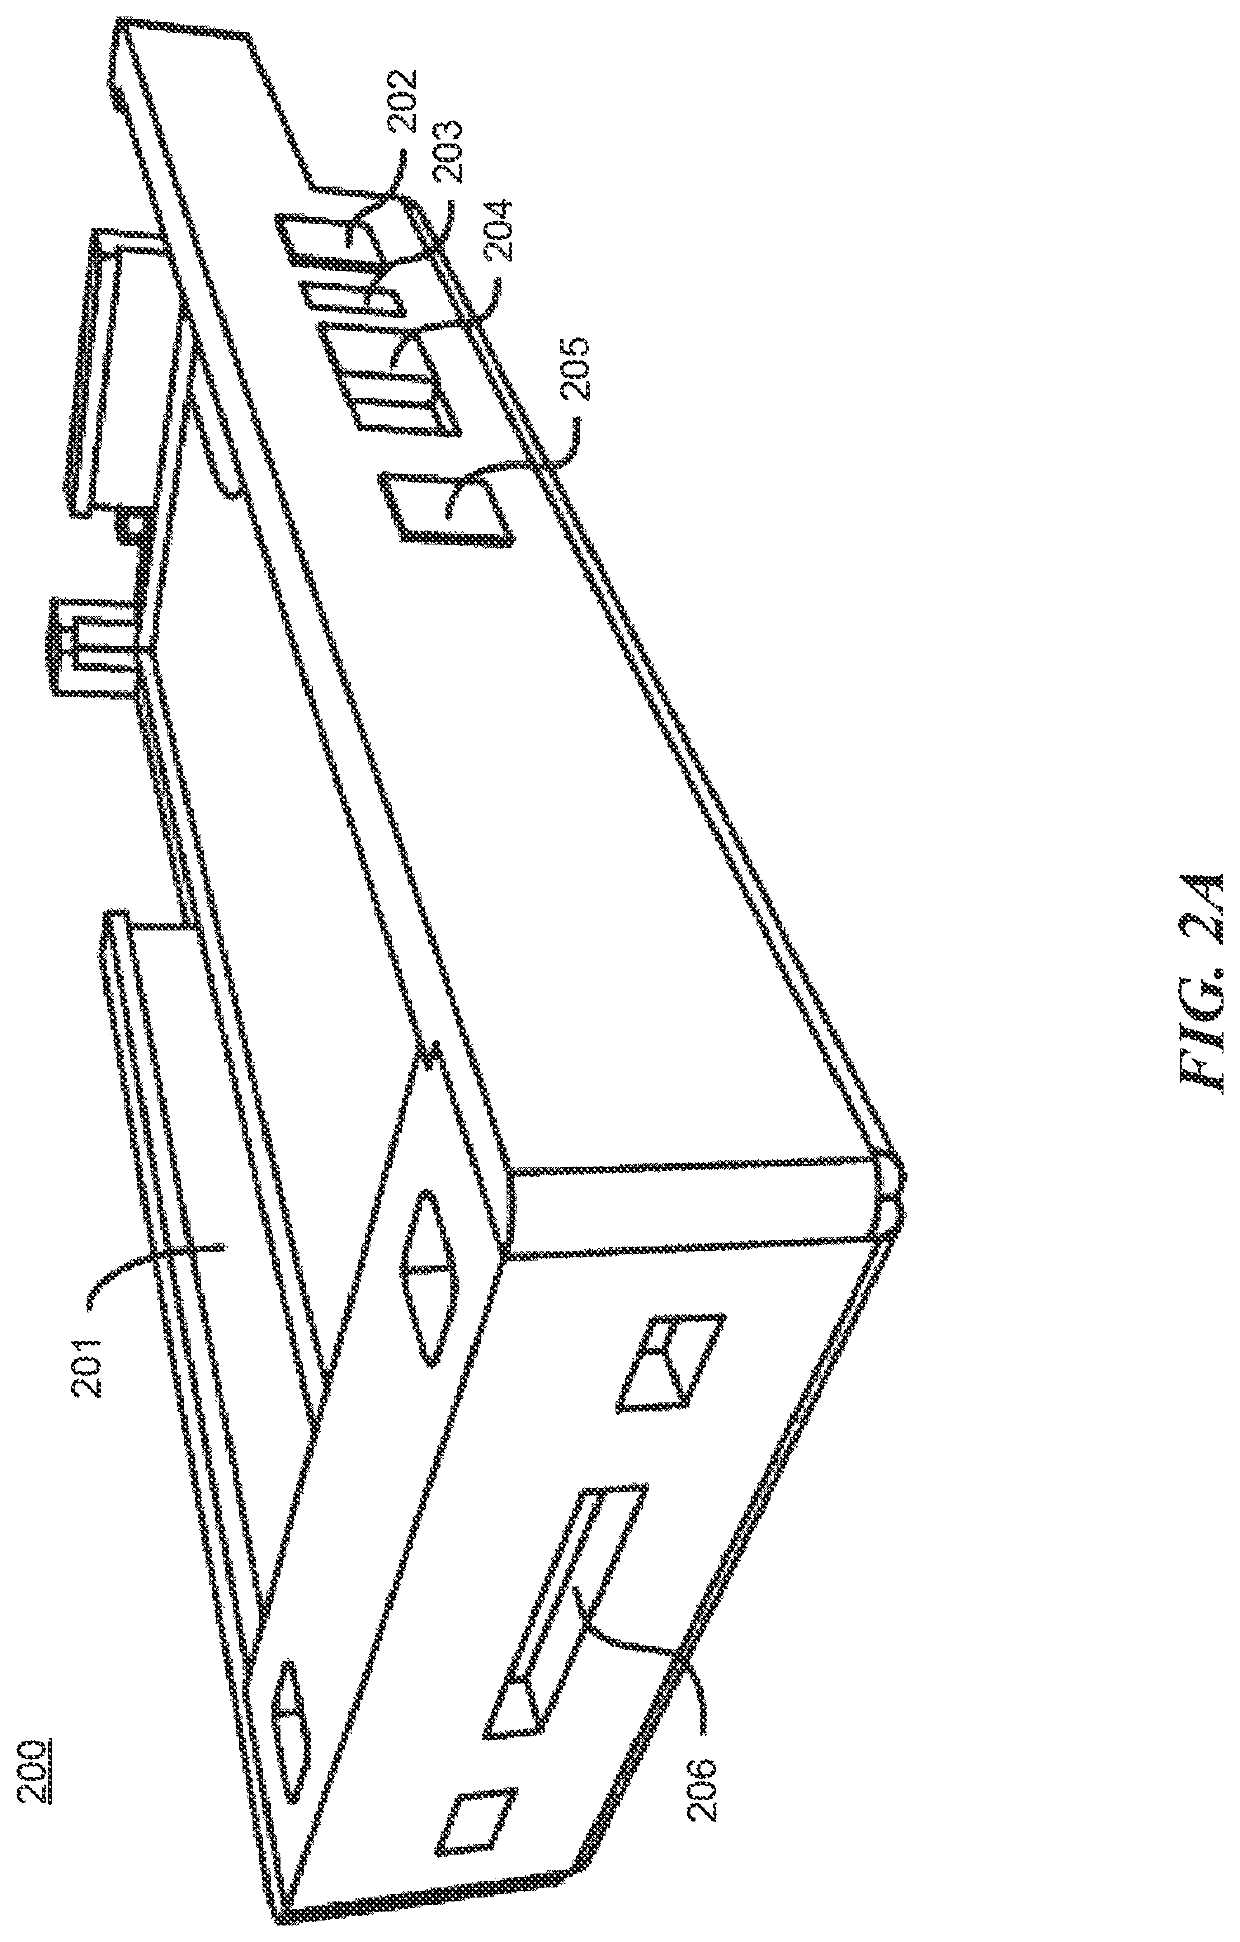 Self-defense device for handheld electronic devices